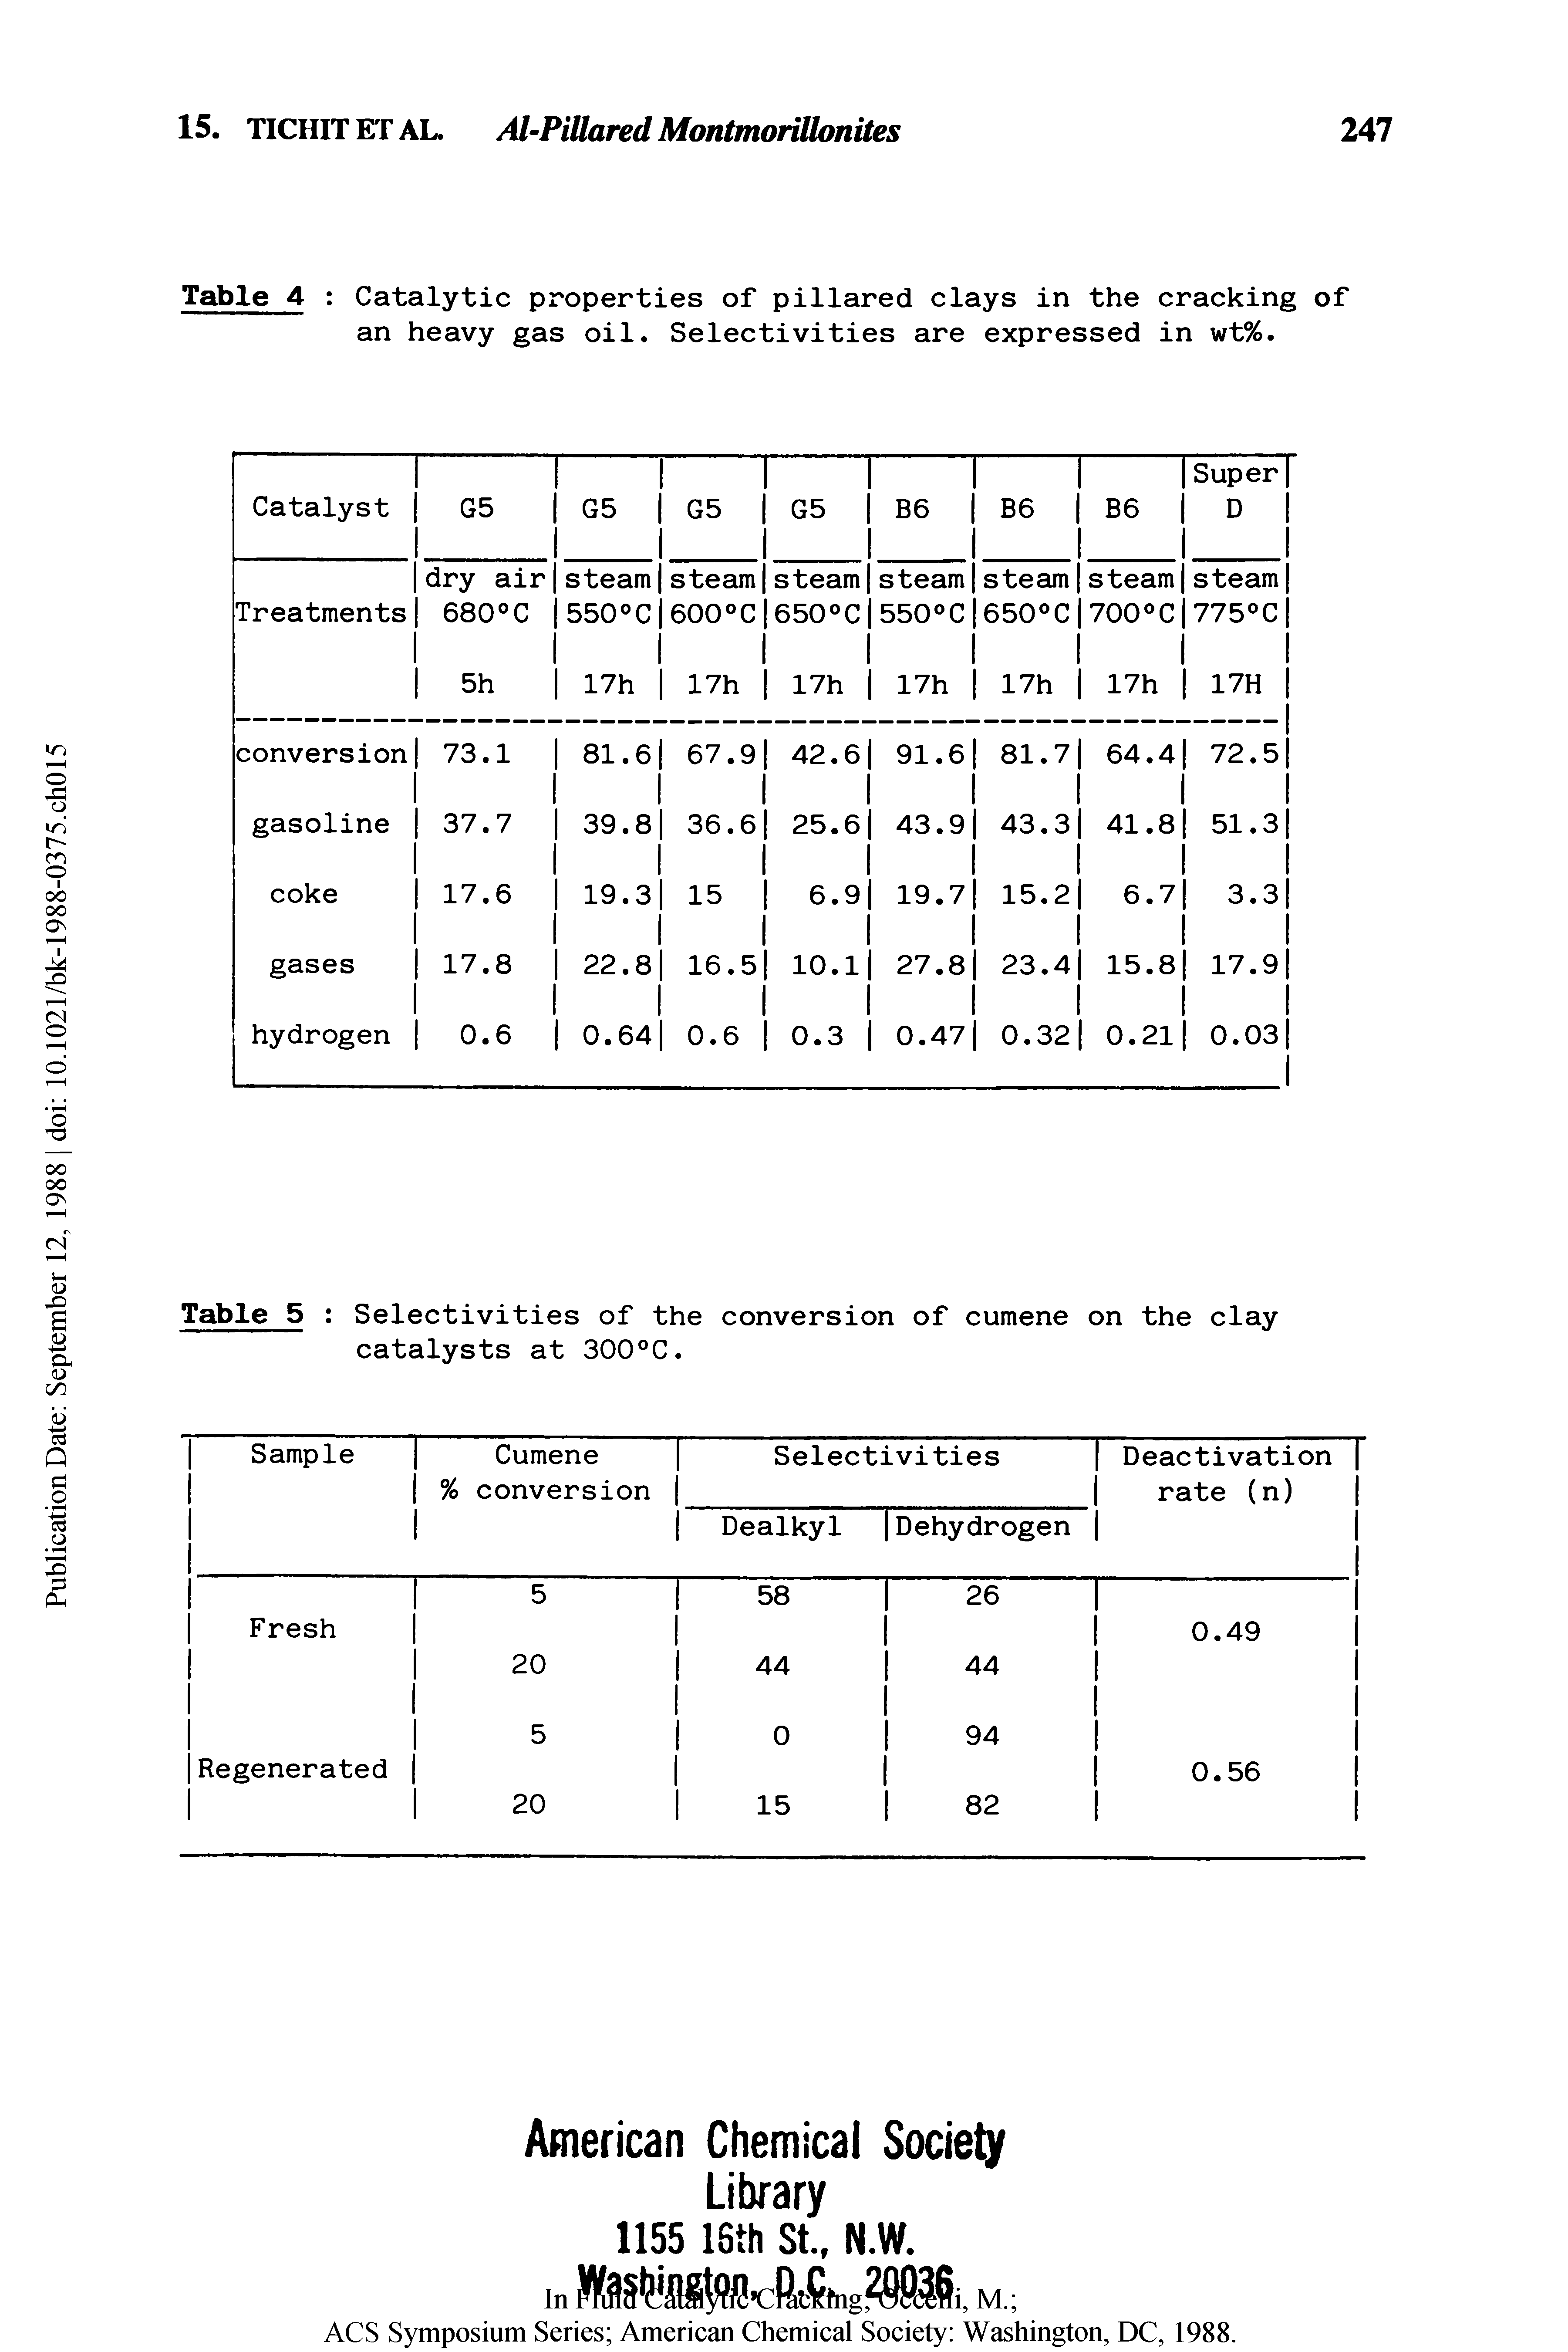 Table 5 Selectivities of the conversion of cumene on the clay catalysts at 300°C.